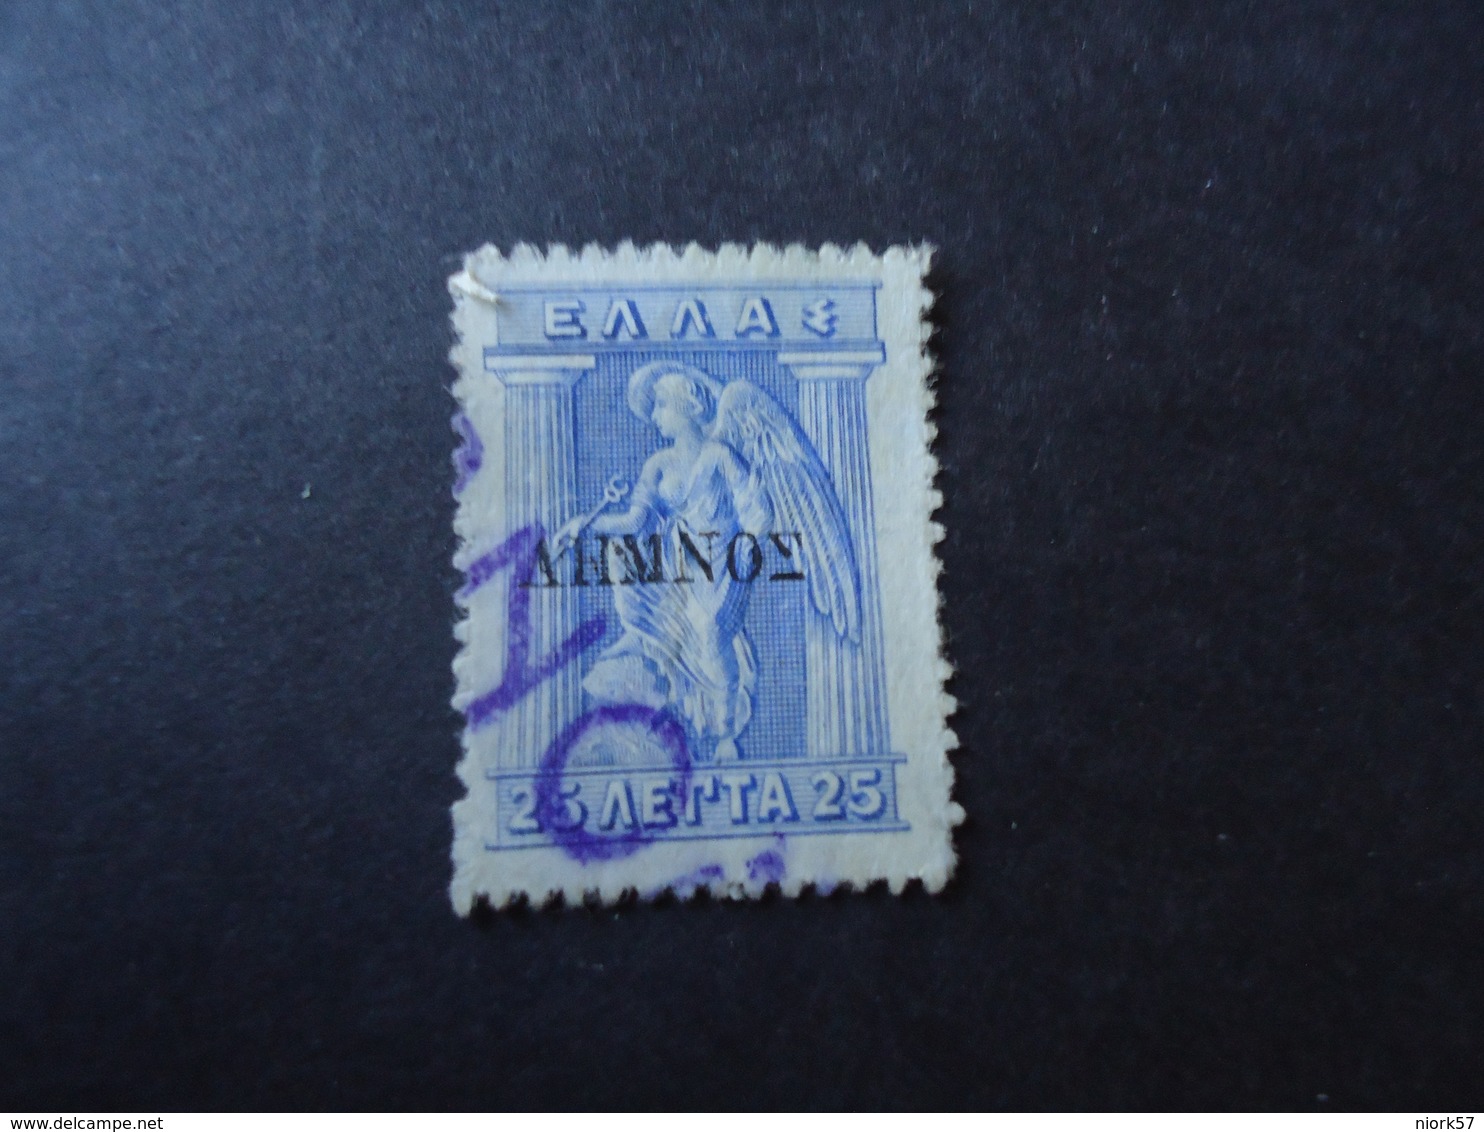 CRETE LEMNOS  GREECE USED STAMPS   WITH POSTMARK  RETHYMNON - Non Classés